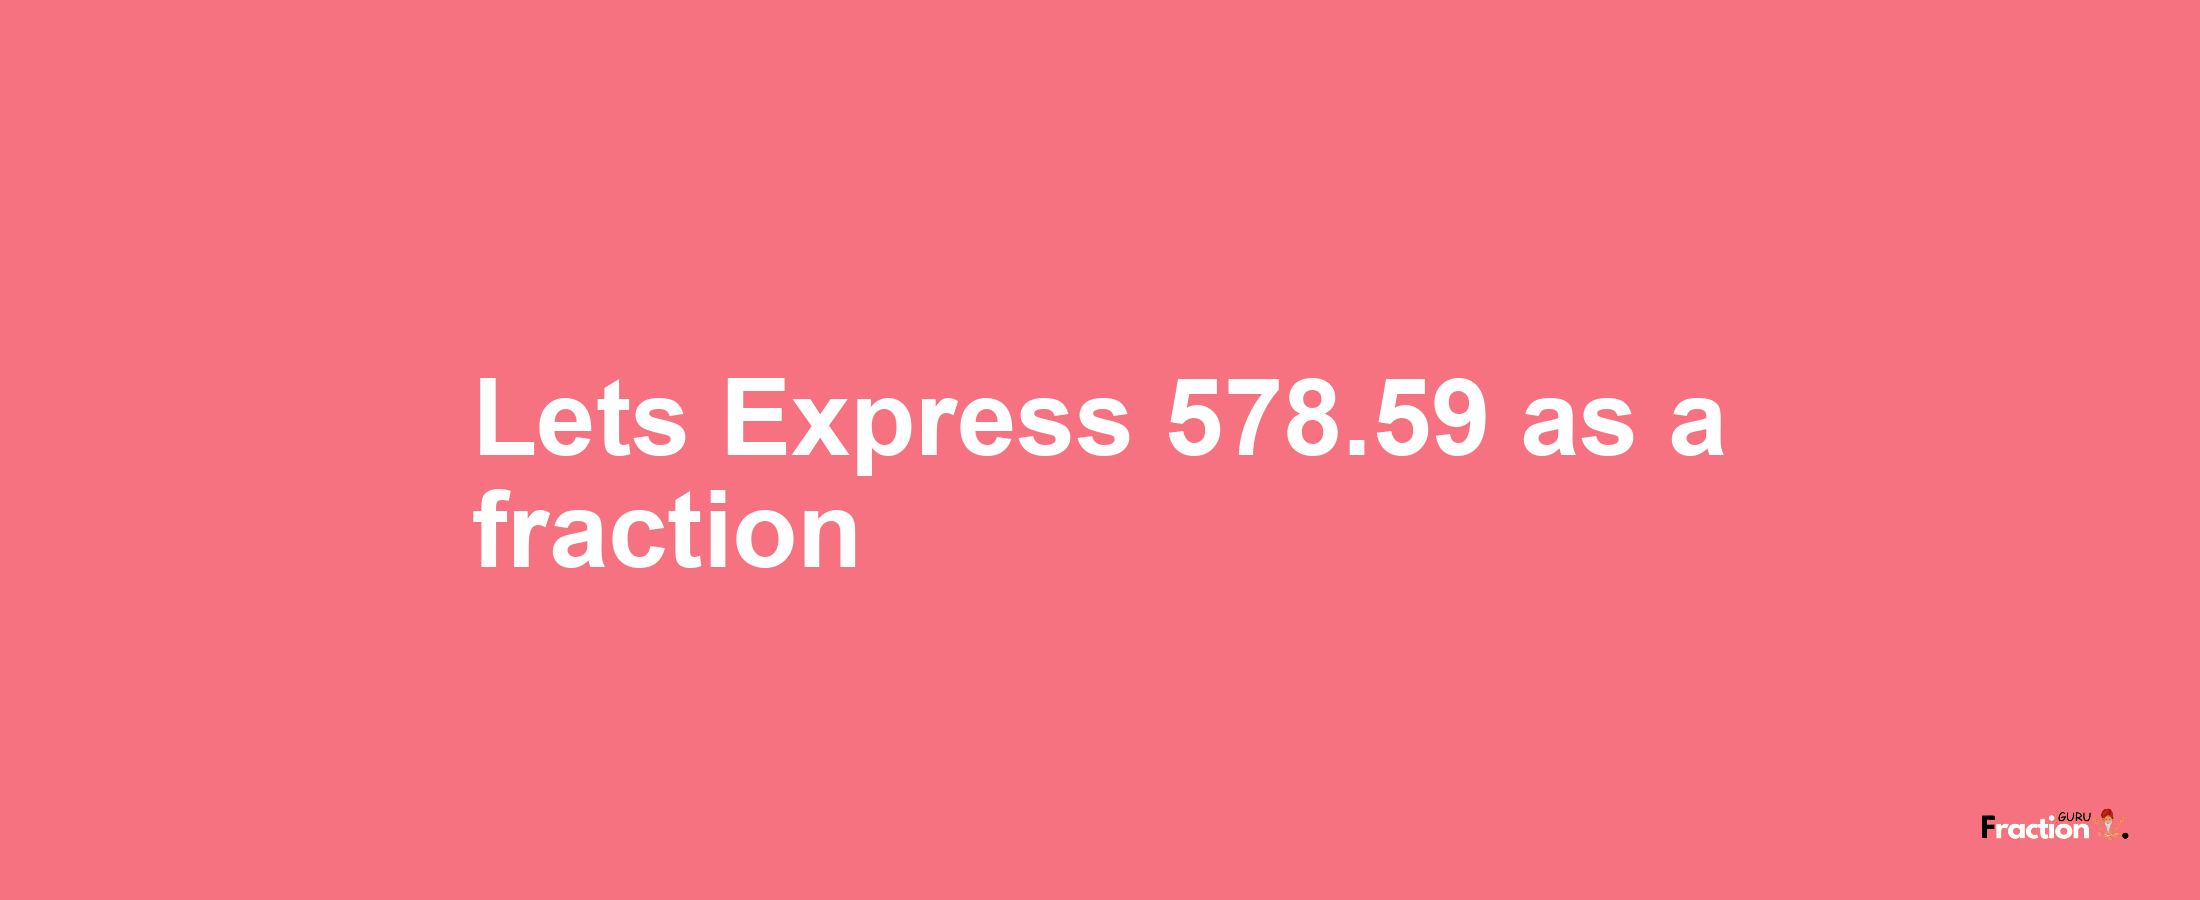 Lets Express 578.59 as afraction